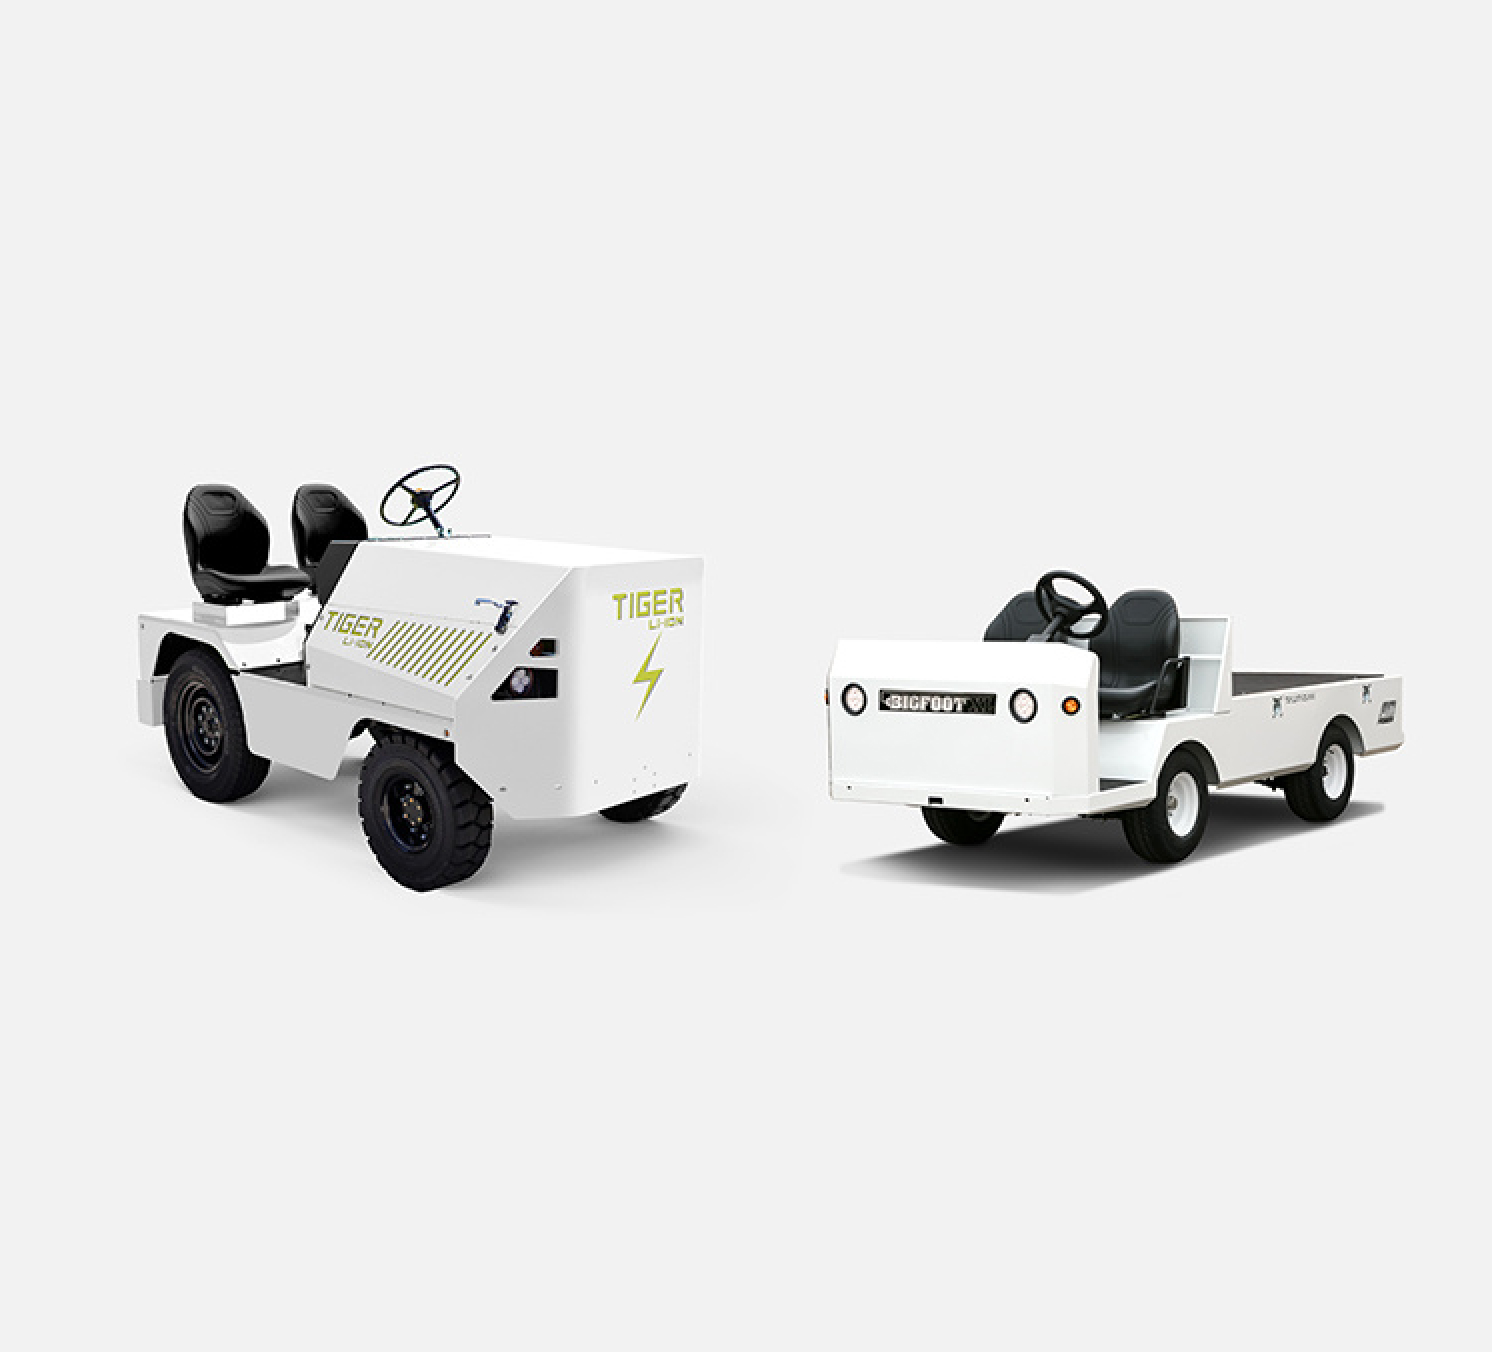 2 utility vehicles: one larger the 